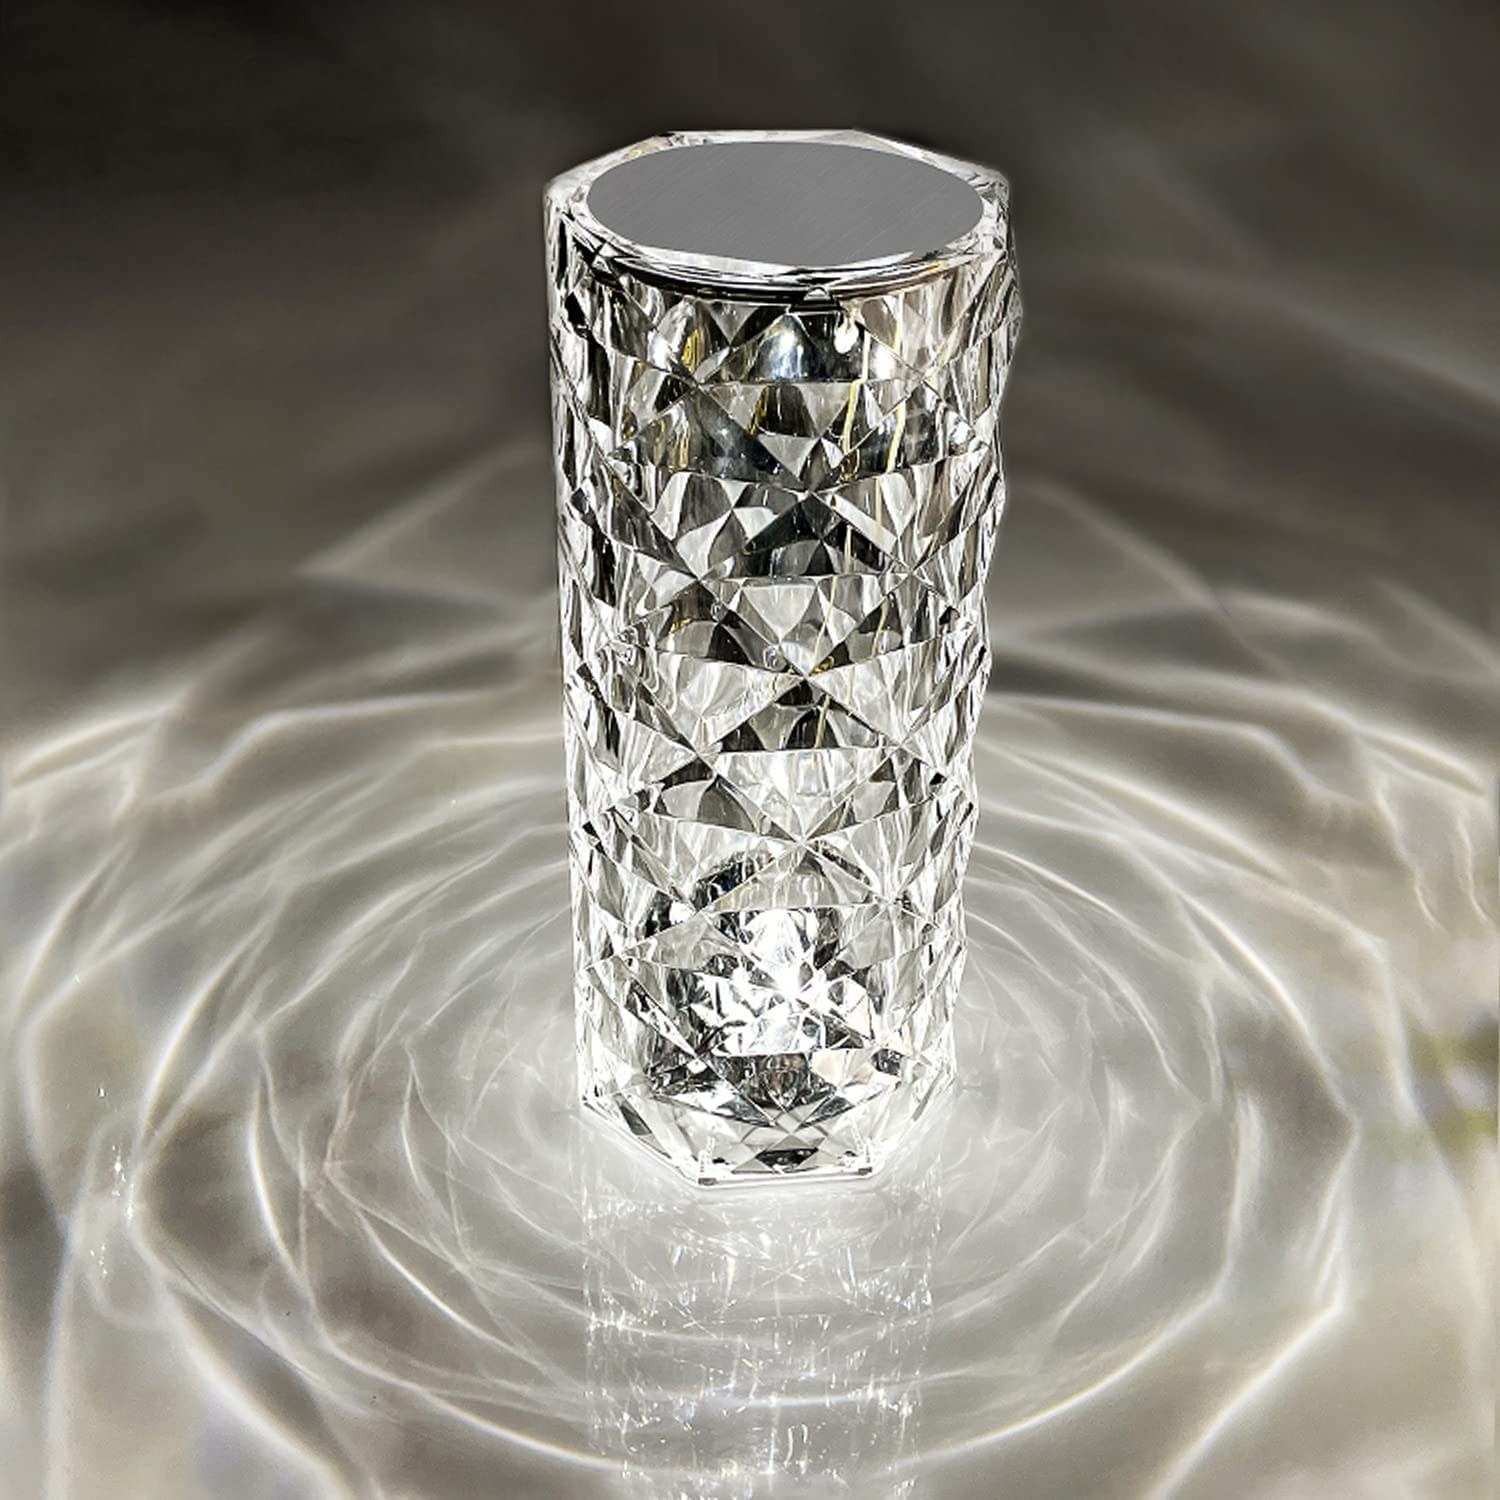 an acrylic tabletop light that gives off a diamond pattern when turned on